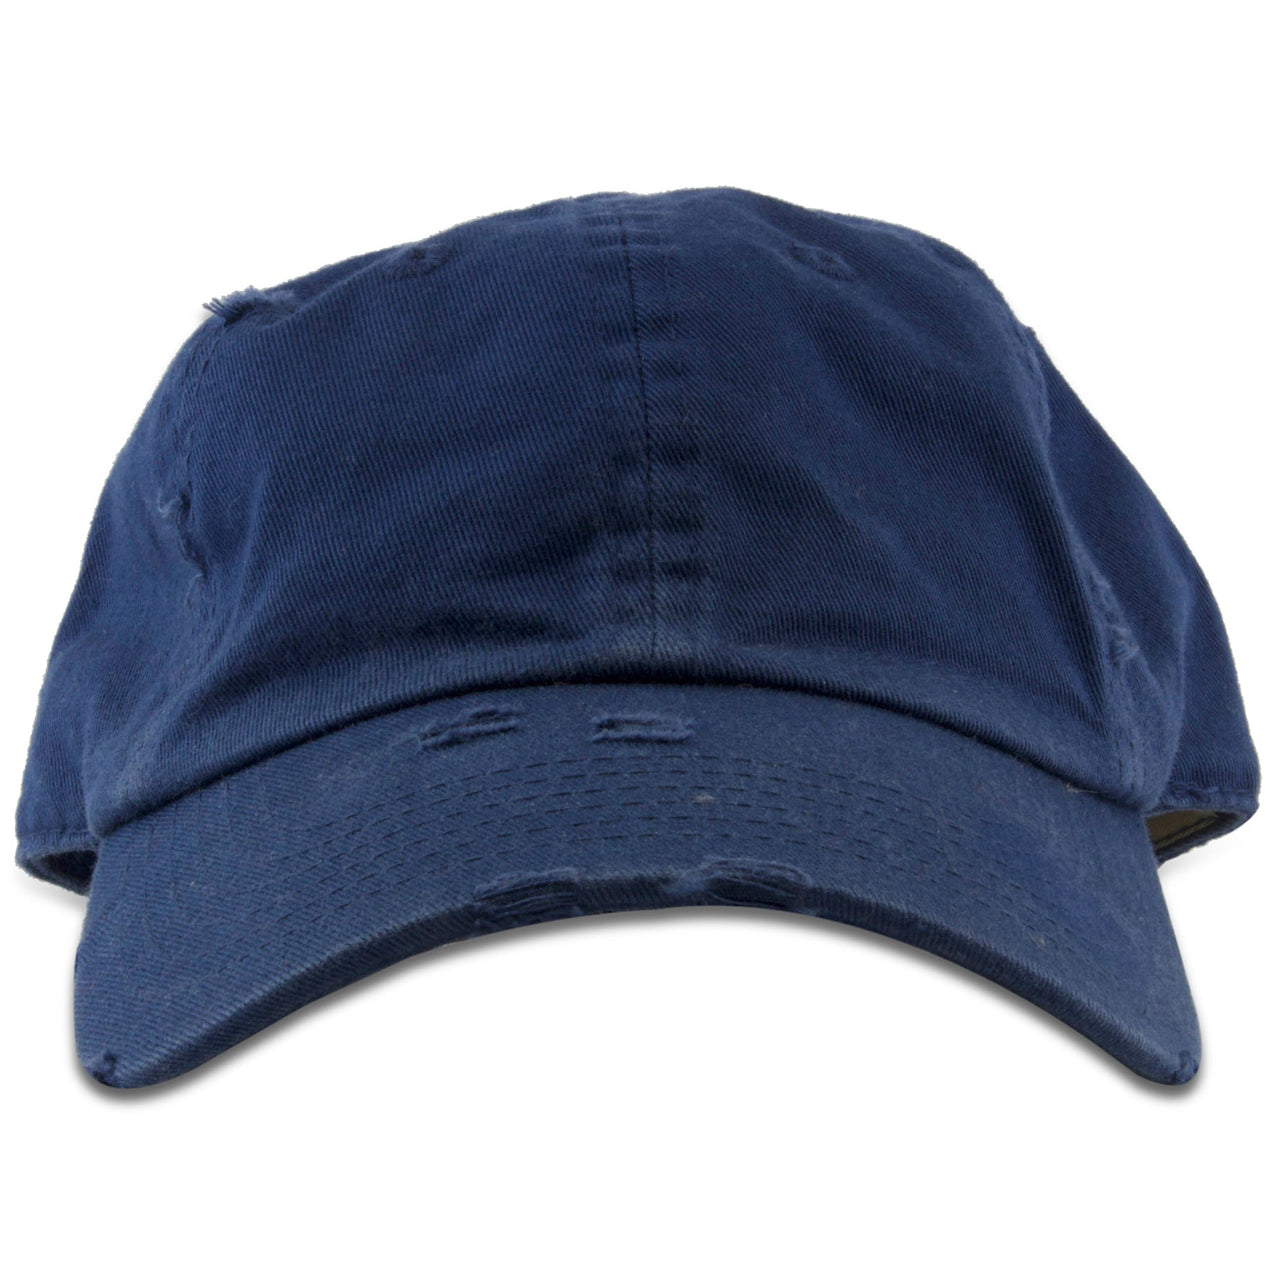 The kid's sized navy blue distressed blank dad hat has a soft unstructured crown and a bent brim